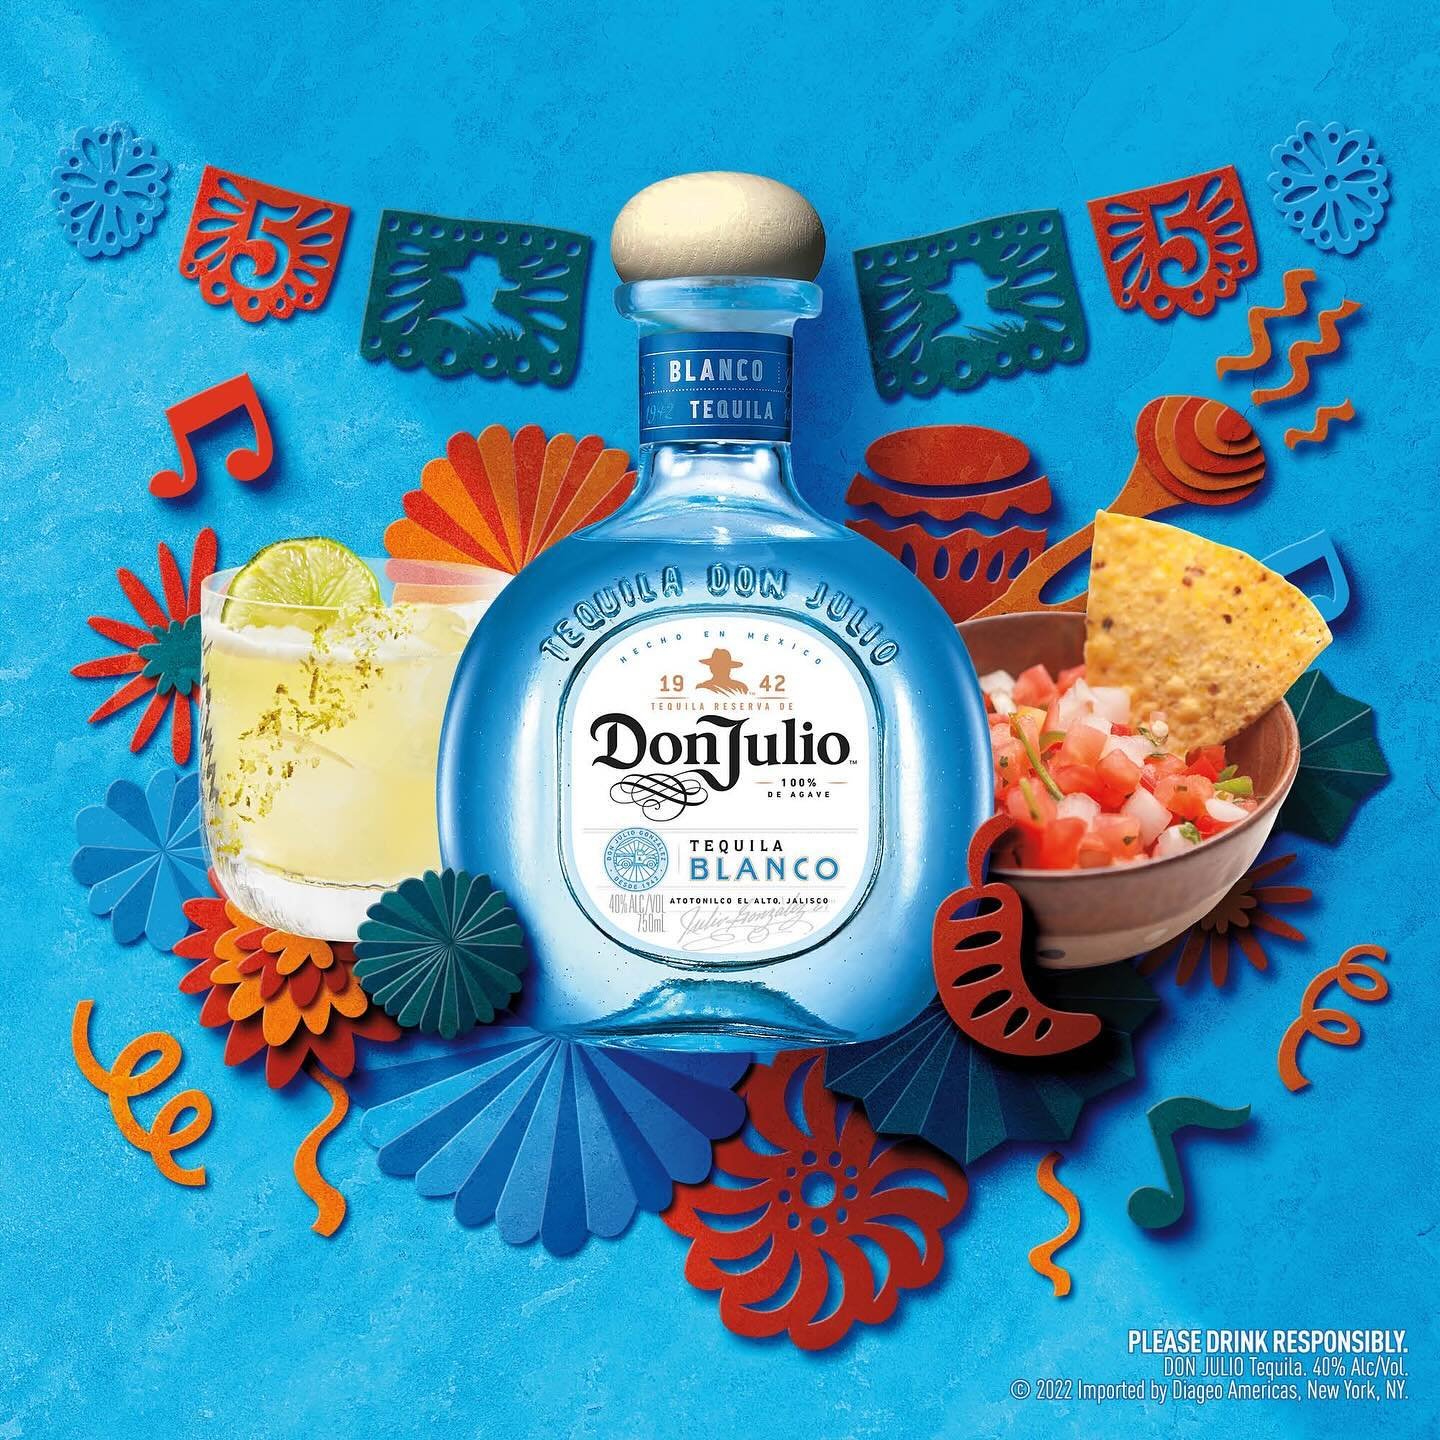 Get ready to fiesta at El Alma for Cinco de Mayo! 🎉 We&rsquo;re excited to announce that @donjuliotequila, @astraltequila, @mezcalunion and @doshombres will be joining us at El Alma Barton Springs! Enjoy free samples and surprises from 1-4:30pm. Bri